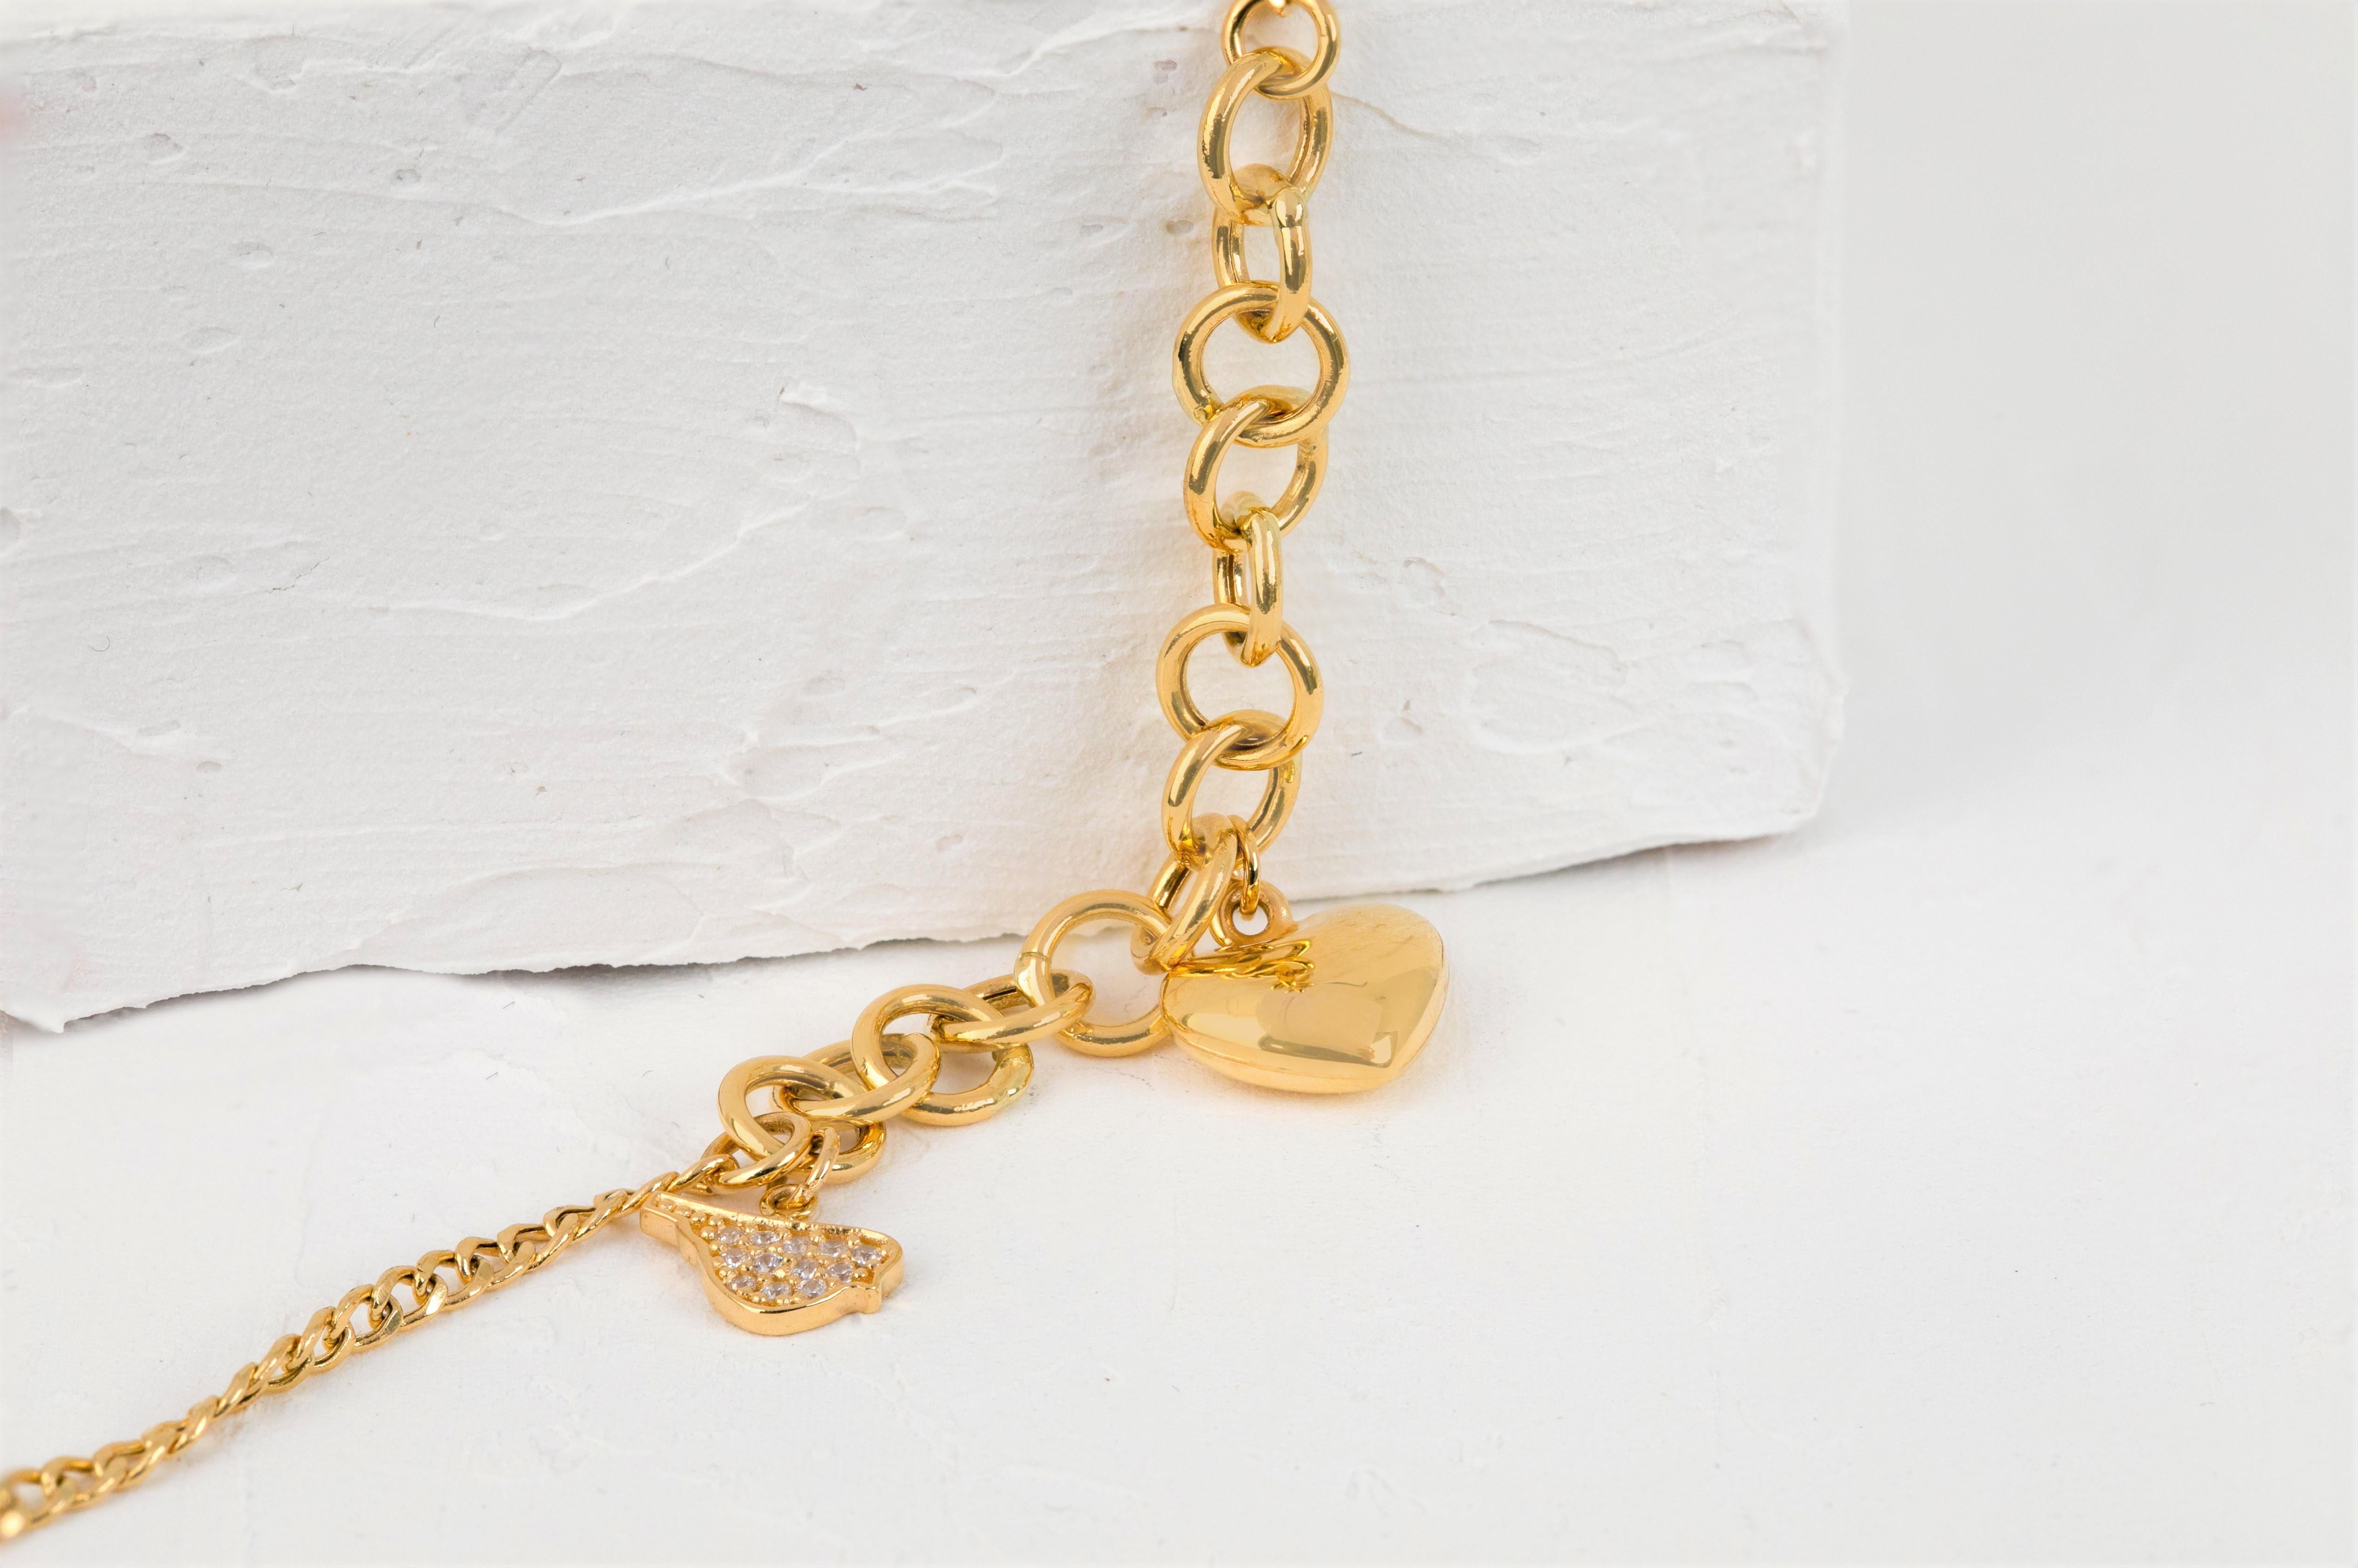 14k Gold Bracelet with Bold Chain, 14k Gold Chain and Heart Sembol Bracelet For Sale 6